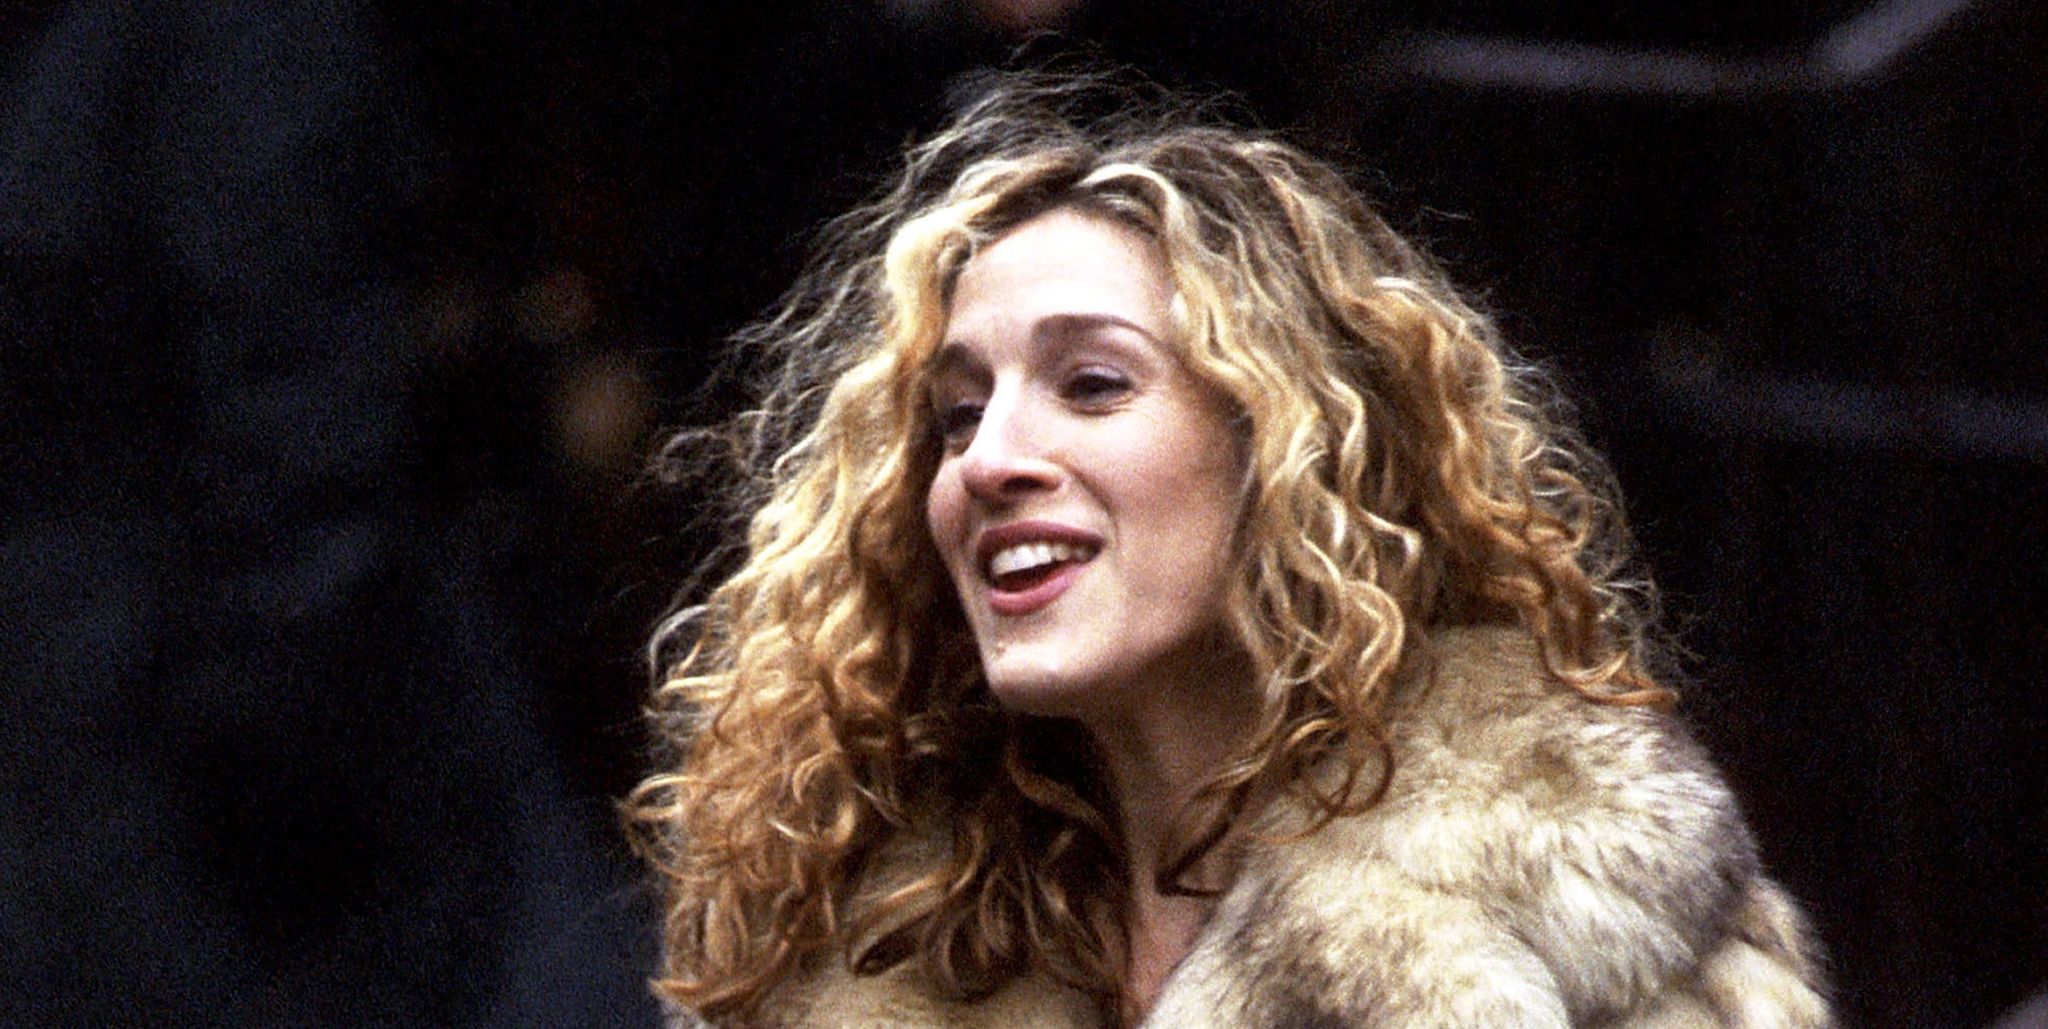 Sarah Jessica Parker in Sex and the City